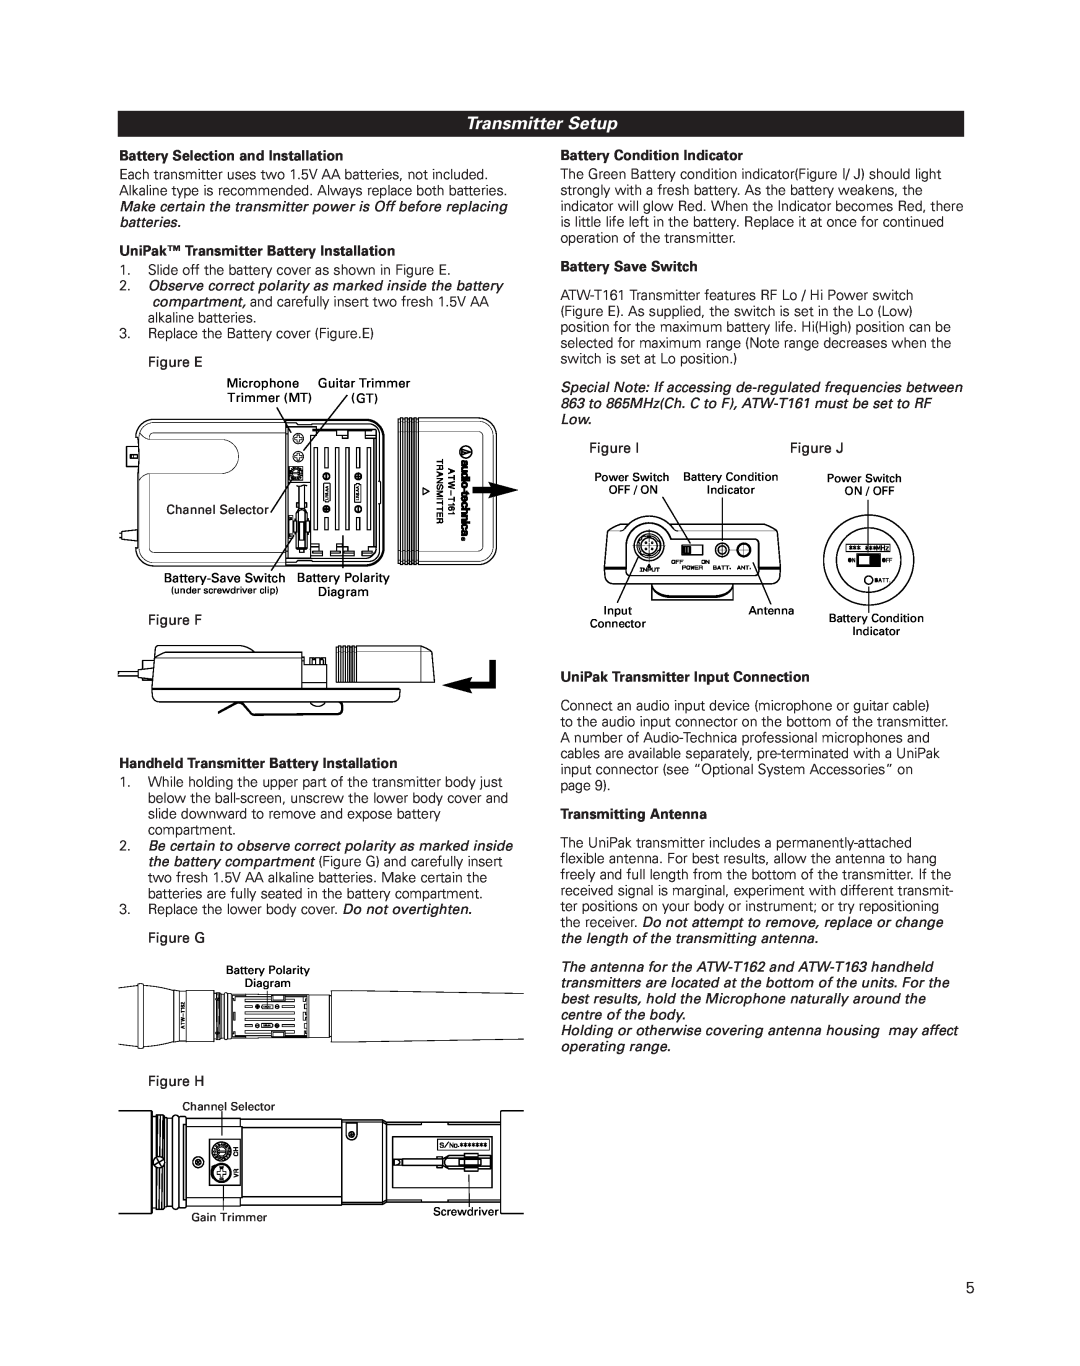 Audio-Technica uhf wireless systems Transmitter Setup, Battery Selection and Installation, Battery Condition Indicator 